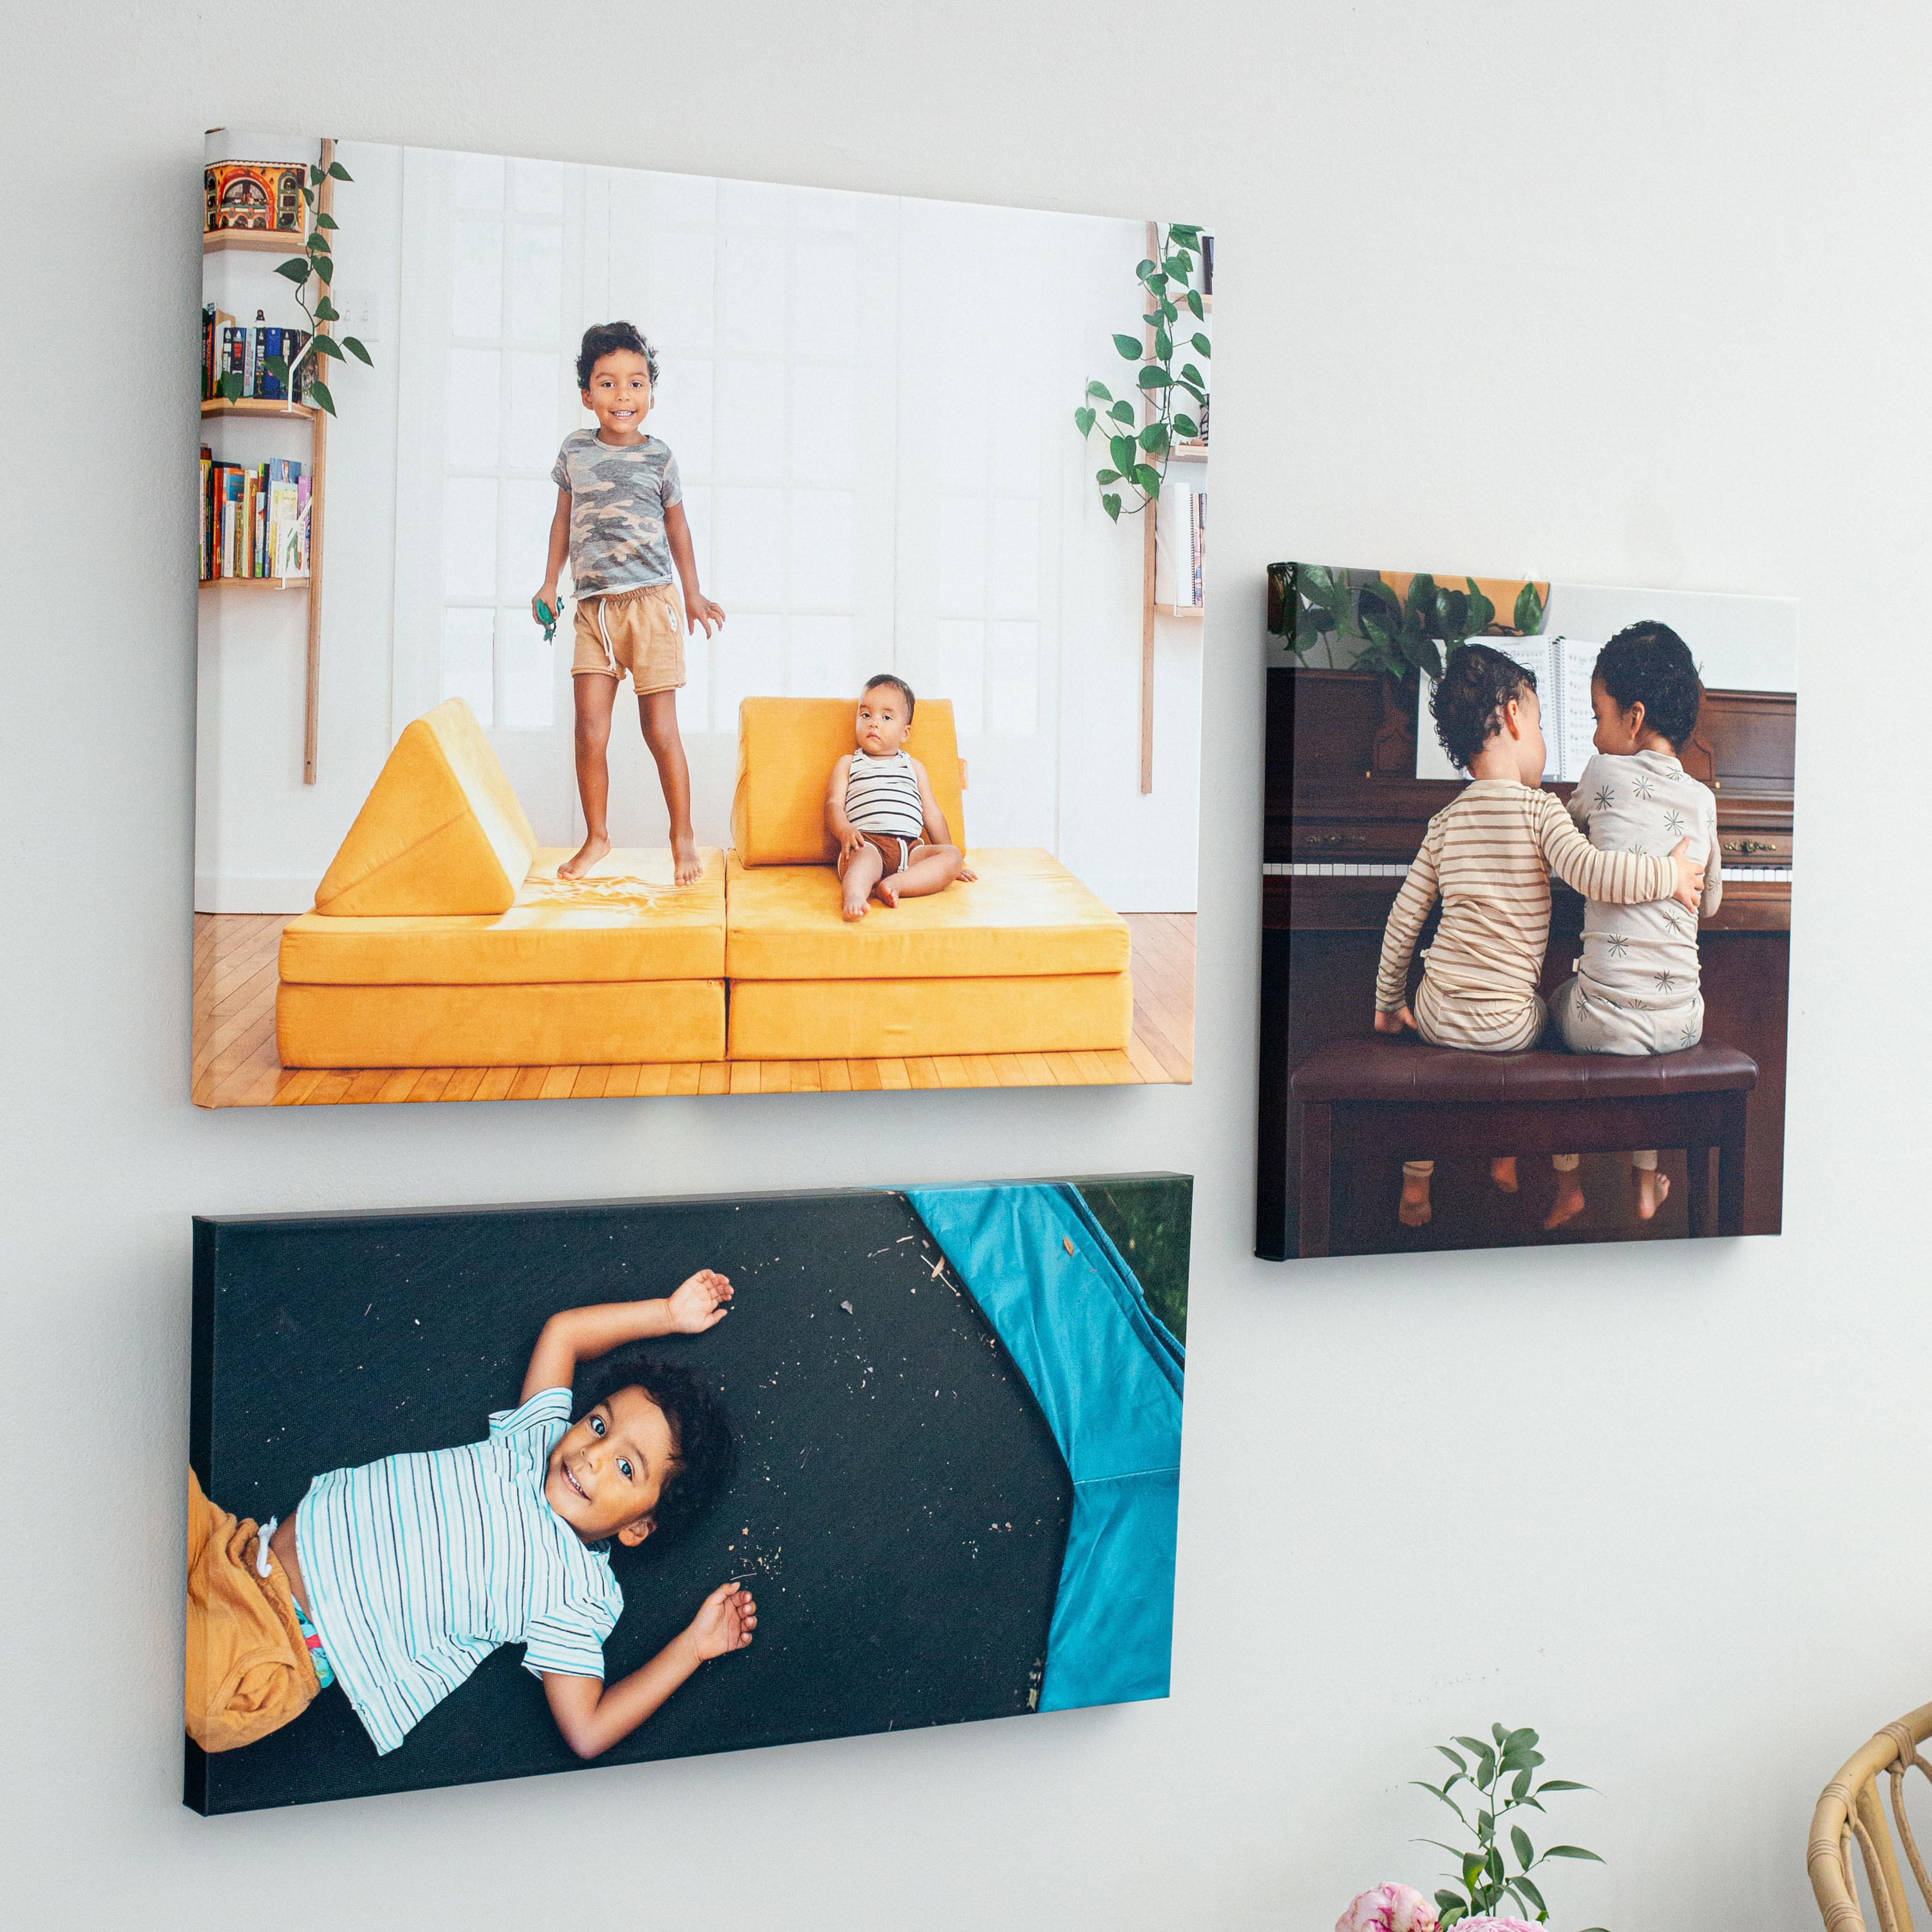 Gallery Wrap Photo Canvas, 16x24 Gallery Wrap Photo Canvas, Full Photo